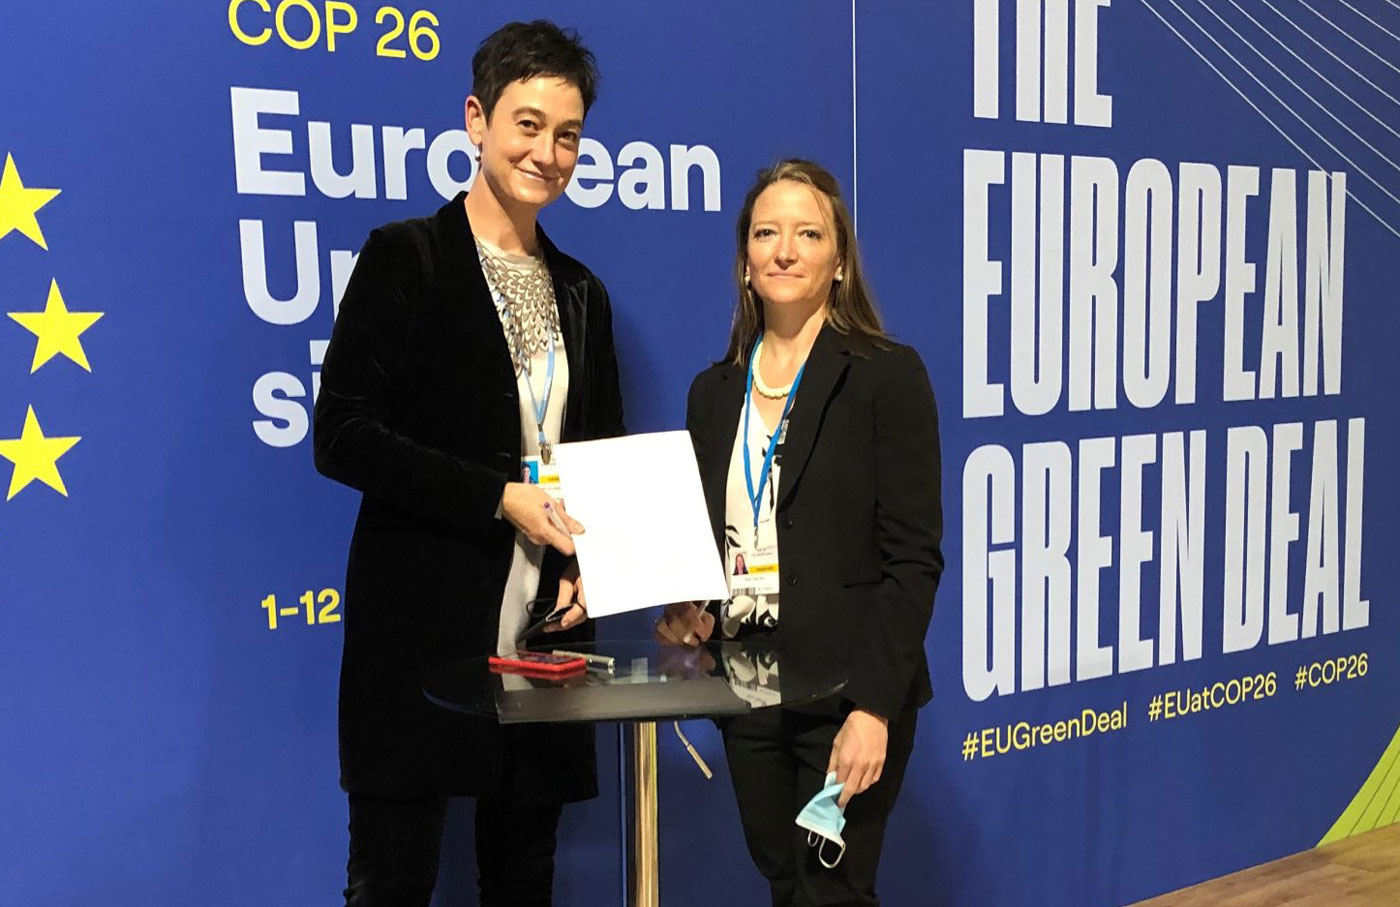 Deputy Director of Climate Resilience Nuin-Tara Key travels to the UN Climate Change Conference COP26 to sign a memorandum of understanding between OPR and the European Institute of Technical Climate-KIC.